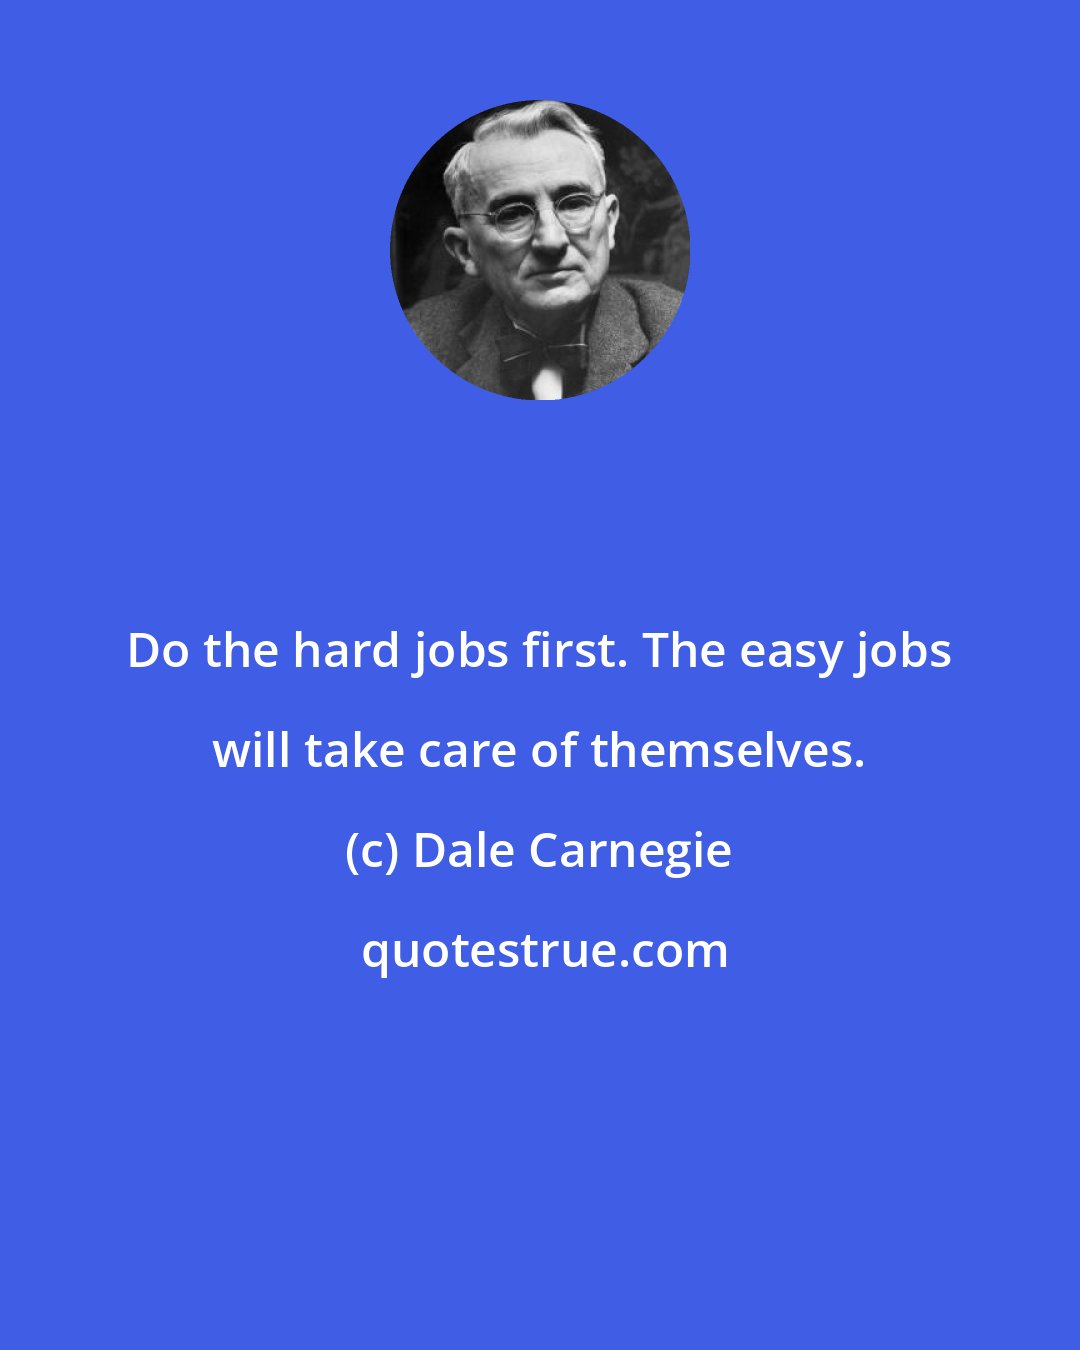 Dale Carnegie: Do the hard jobs first. The easy jobs will take care of themselves.